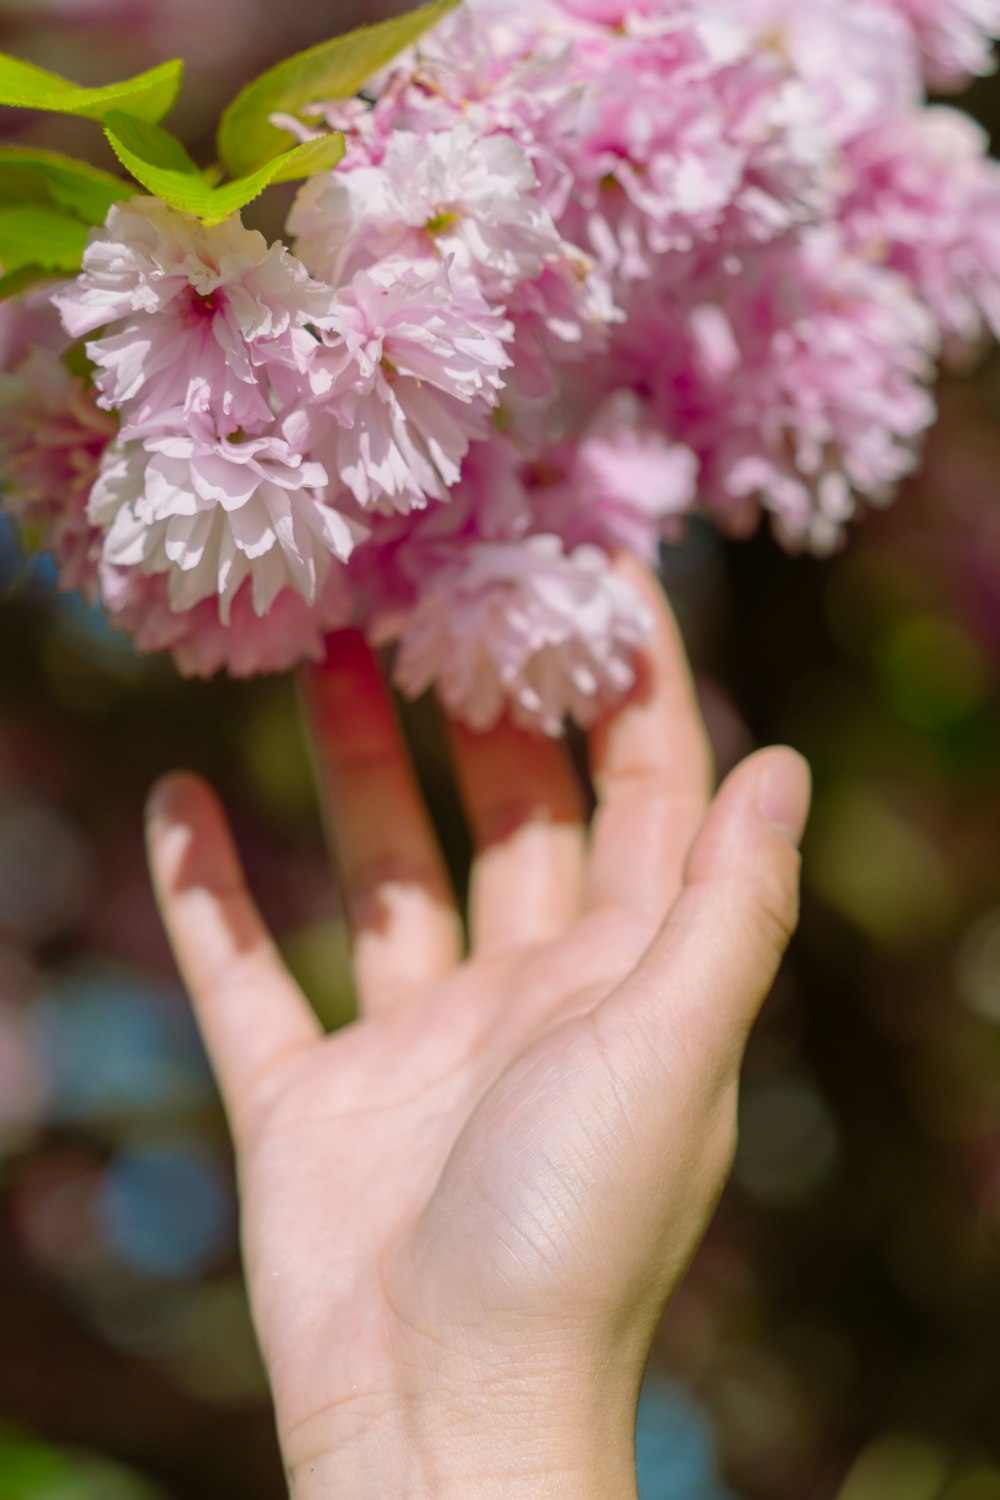 a person's hand reaching for a pink flower